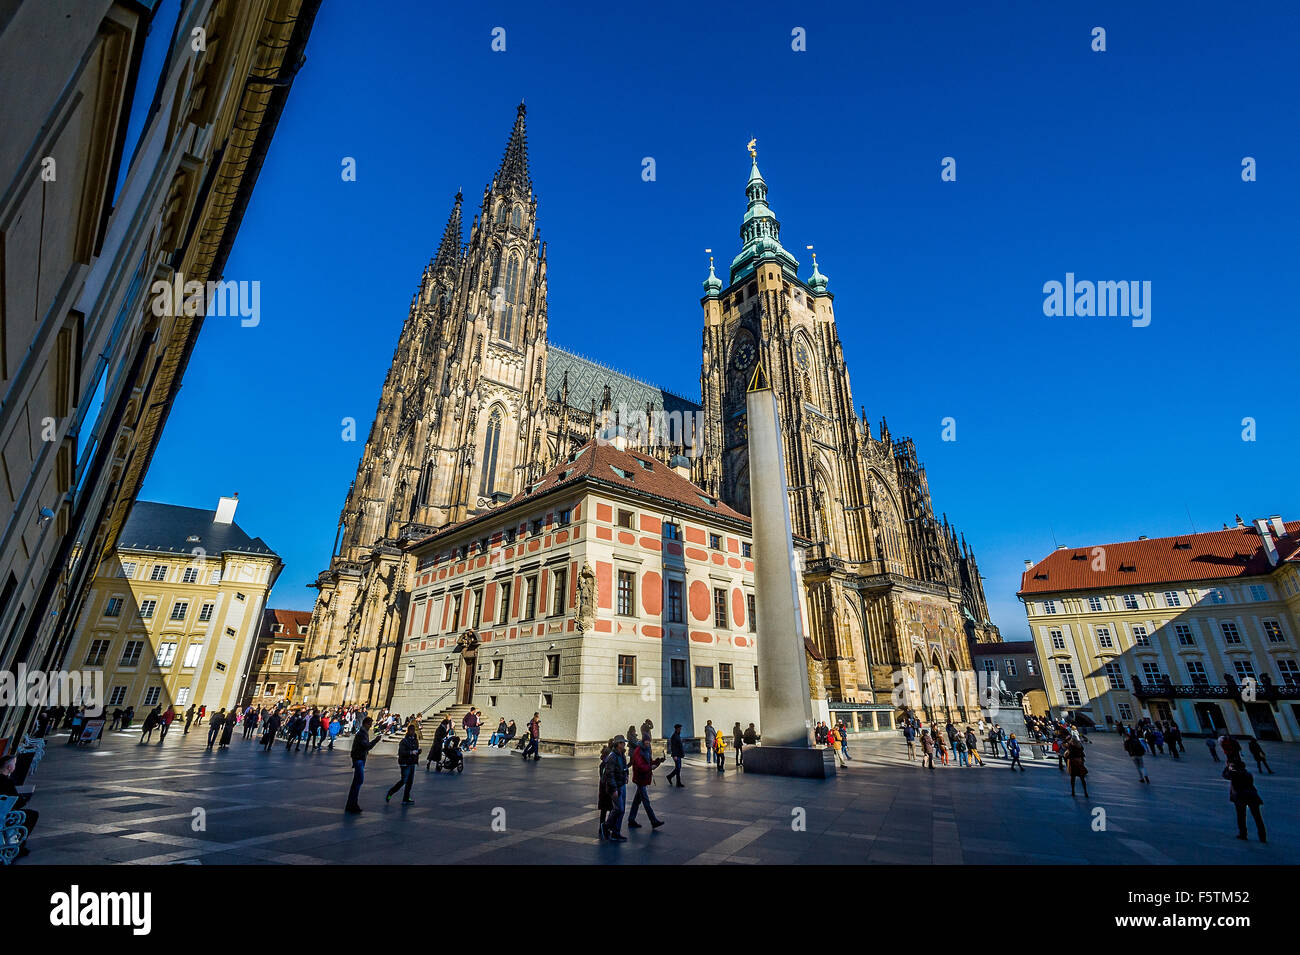 St. Vitus Cathedral in Prague Stock Photo